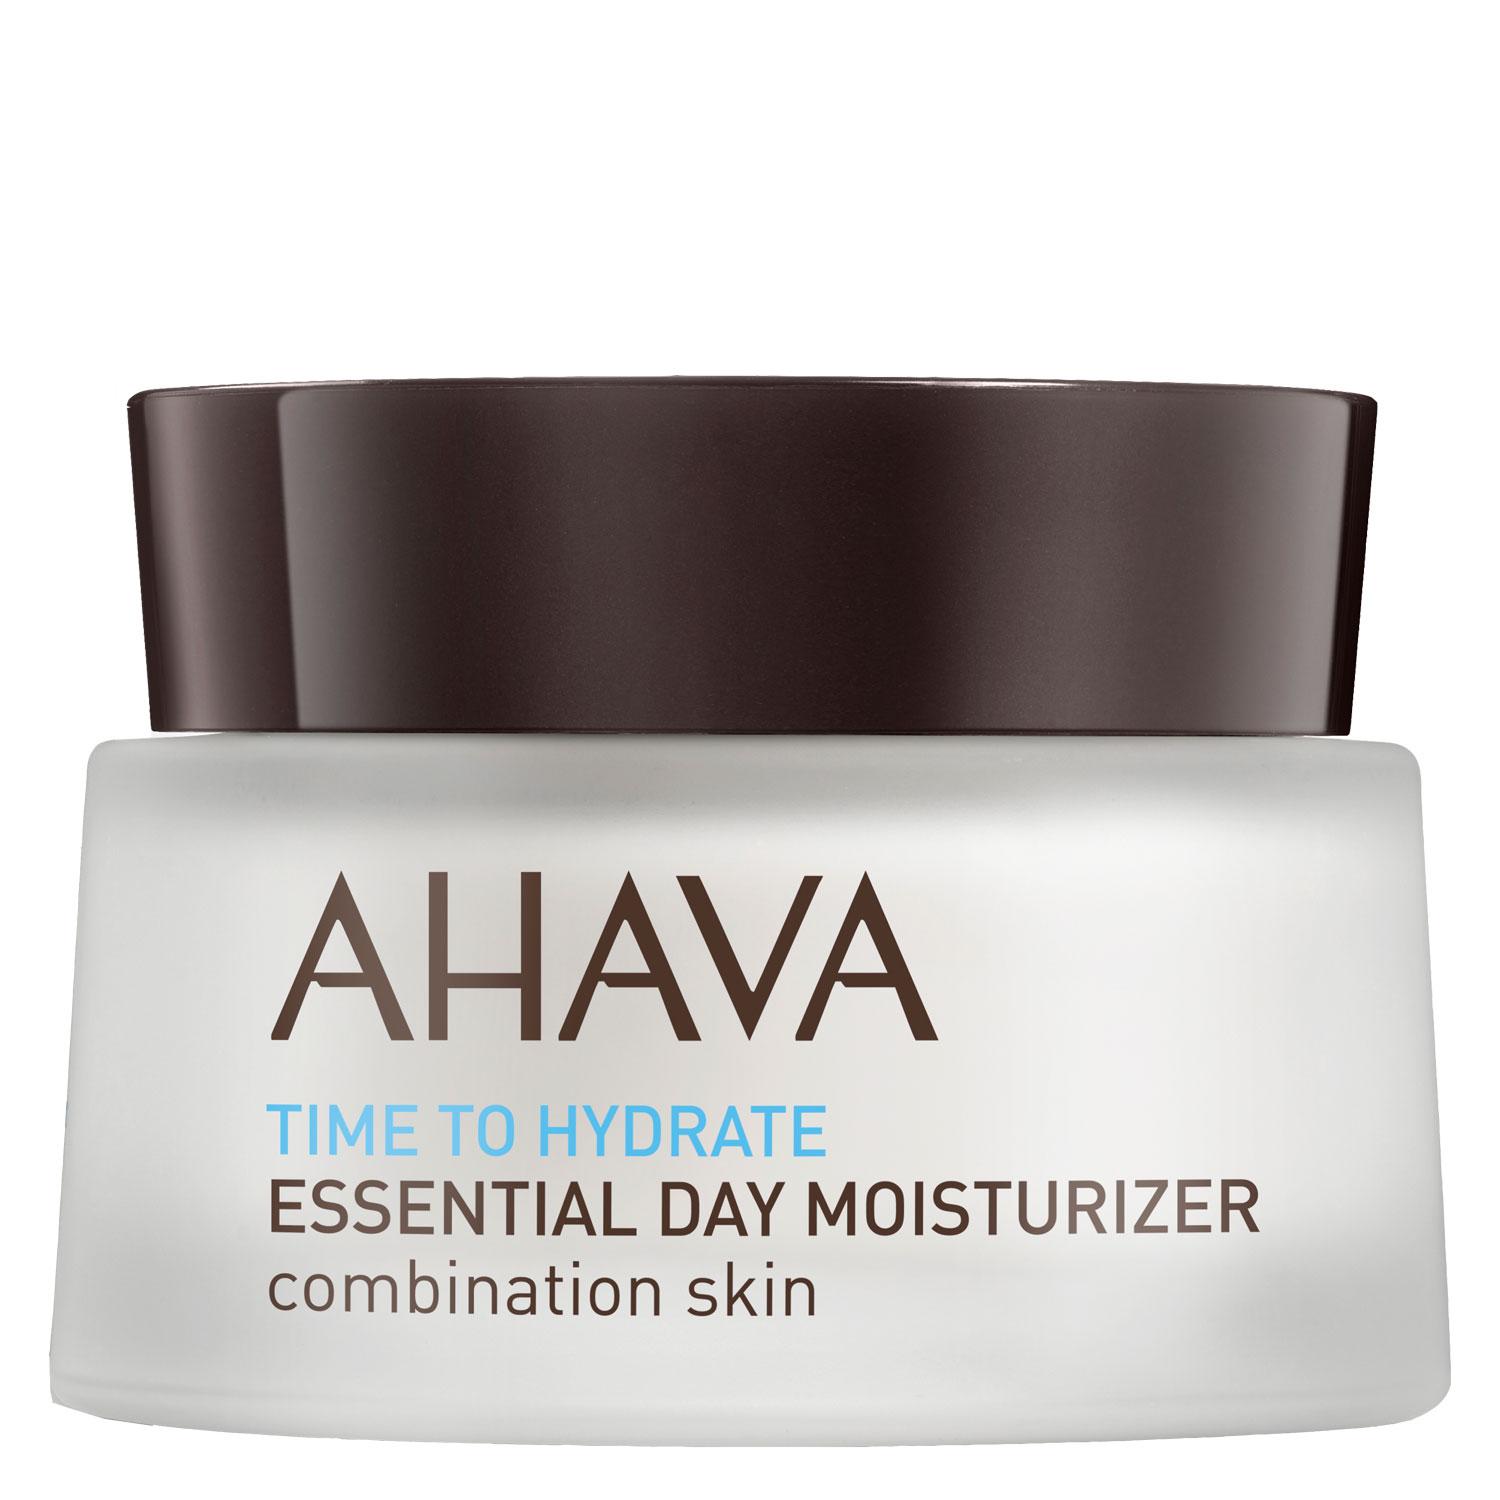 Time To Hydrate - Essential Day Moisturizer Combination Skin